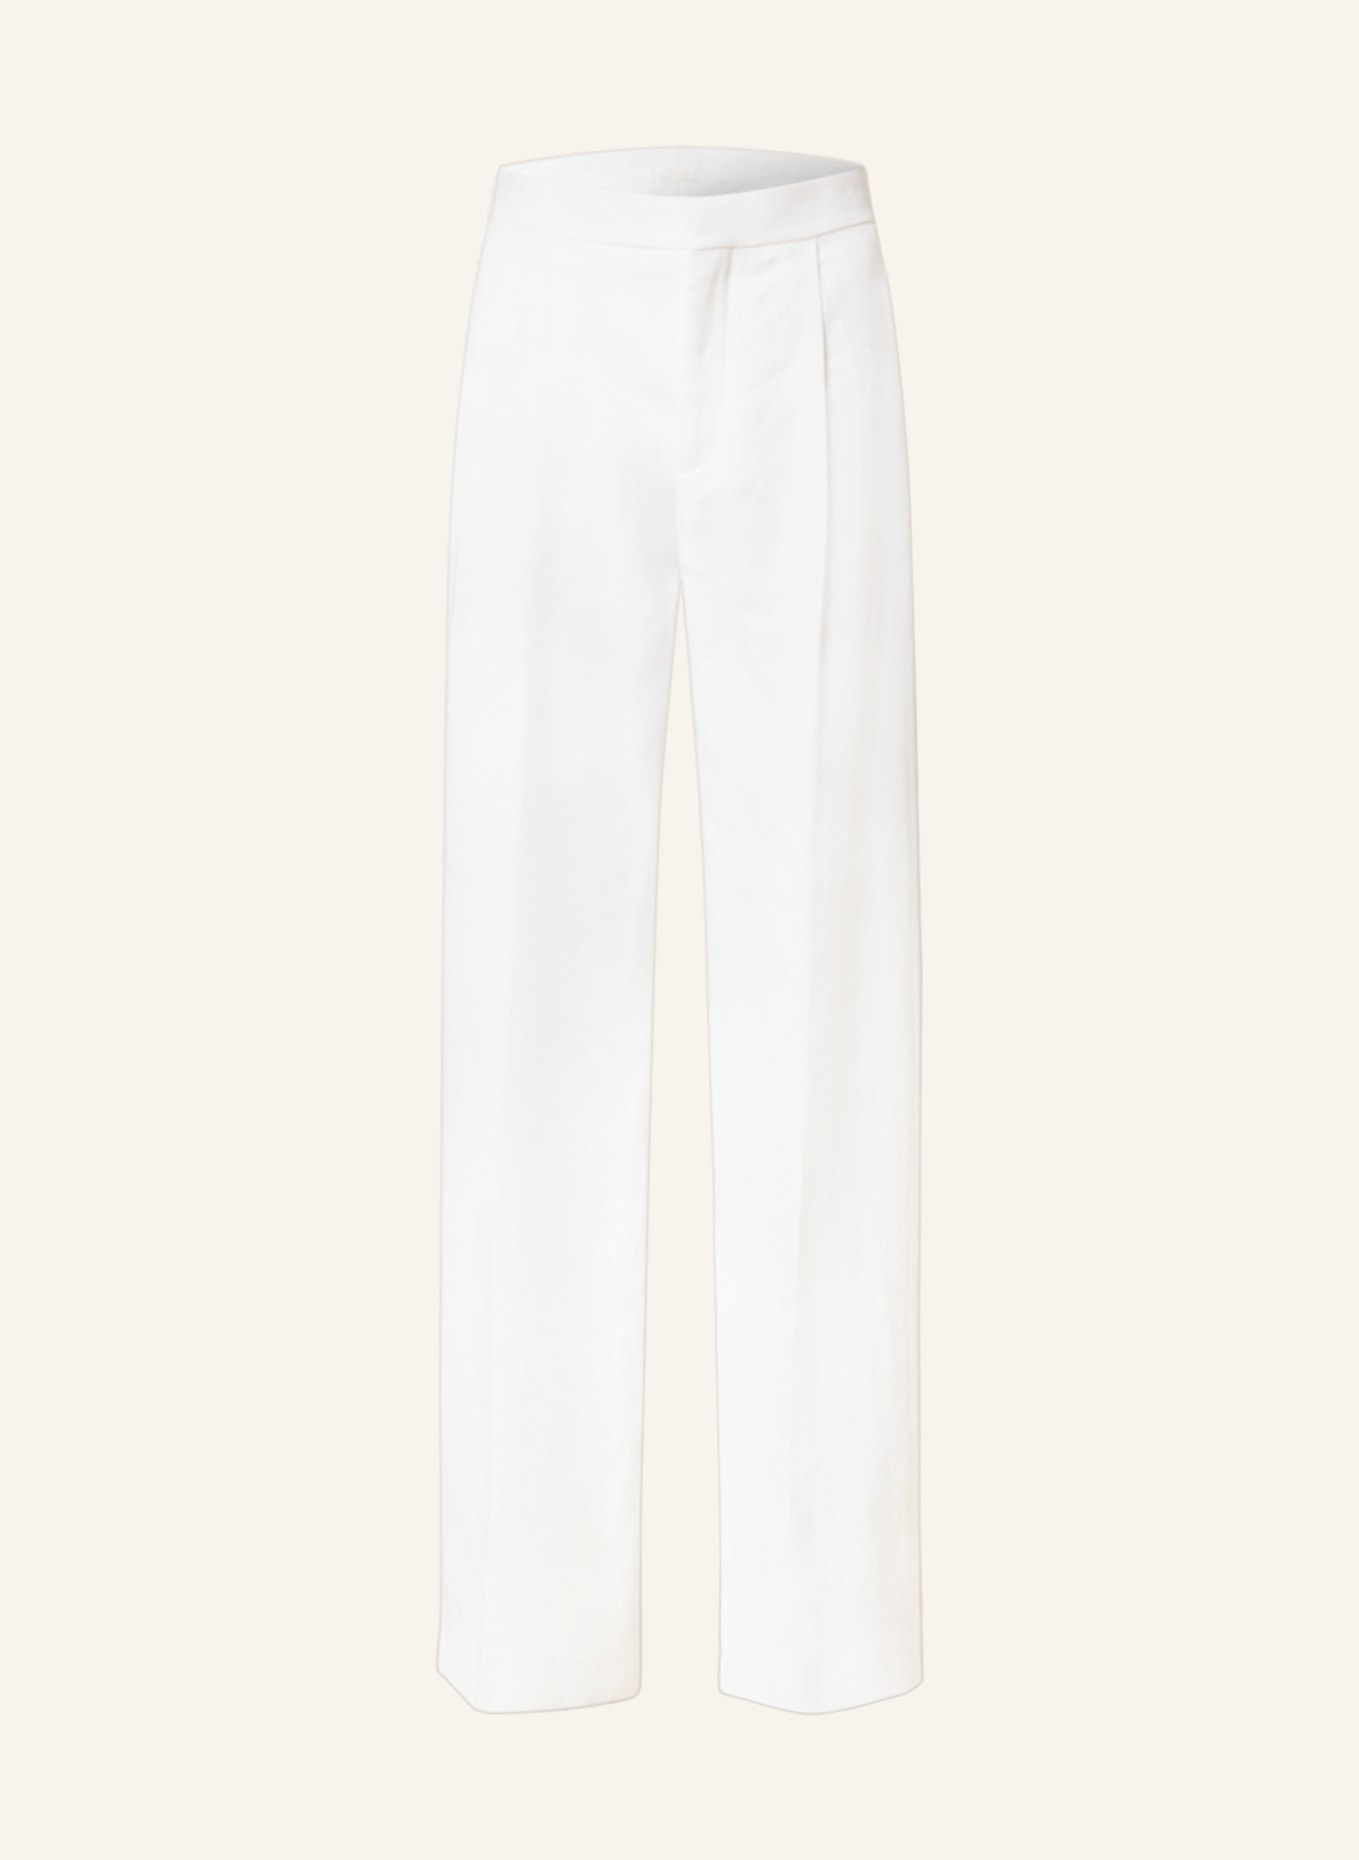 Chloe WideLeg Denim Trousers with LaceUp Detail  Neiman Marcus